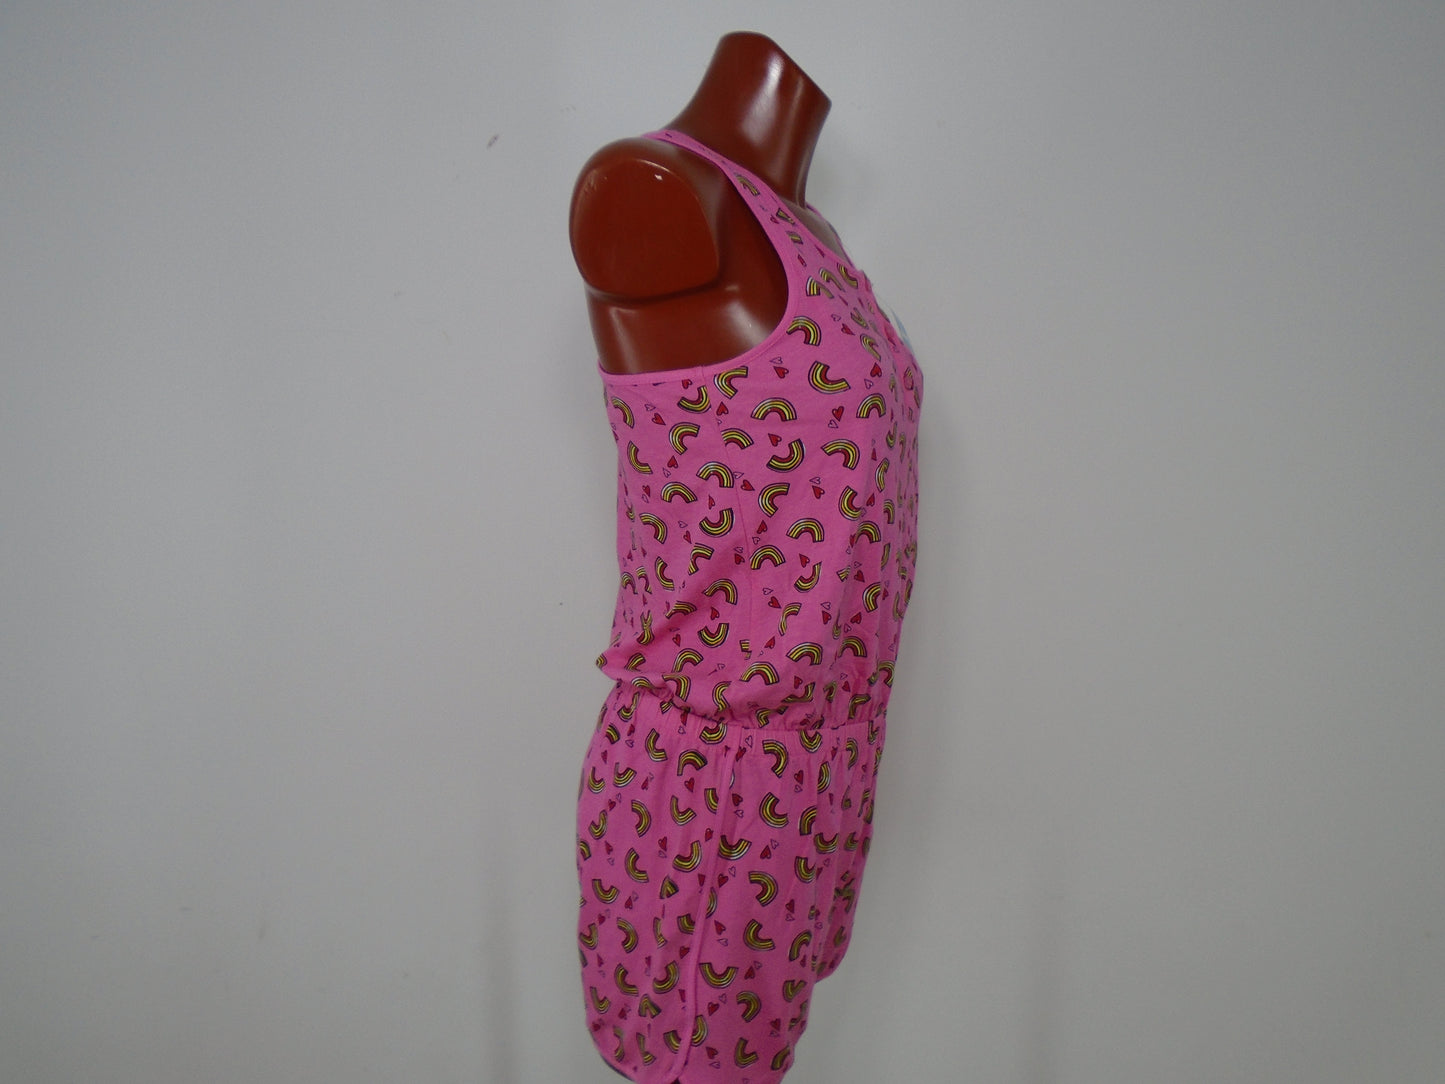 Women's Shorts pepperts. Pink. XS. New with tags